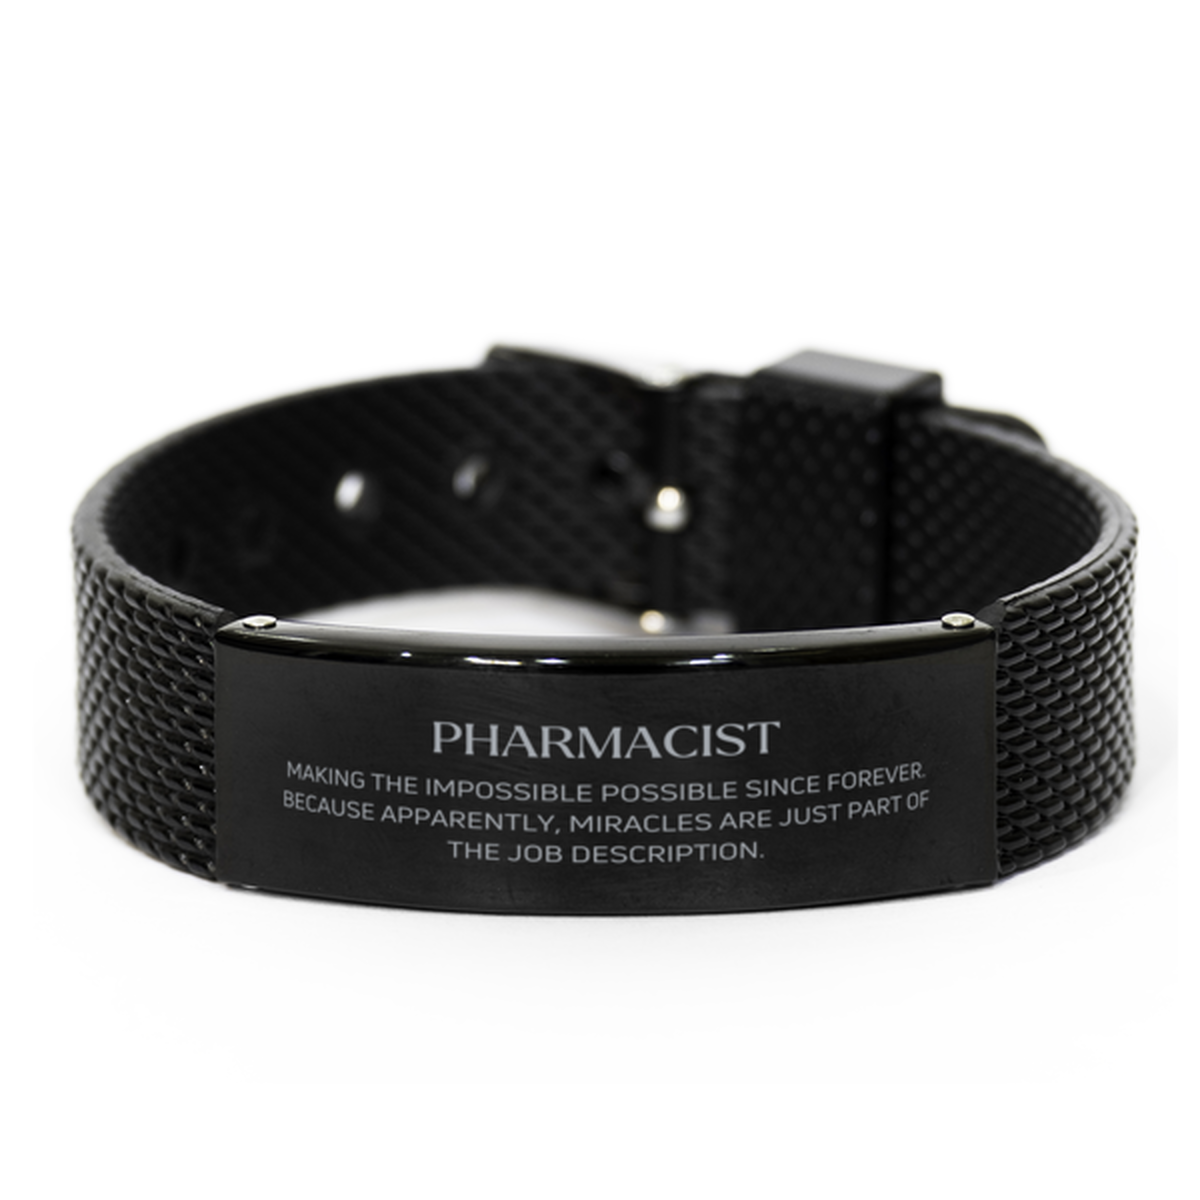 Funny Pharmacist Gifts, Miracles are just part of the job description, Inspirational Birthday Black Shark Mesh Bracelet For Pharmacist, Men, Women, Coworkers, Friends, Boss